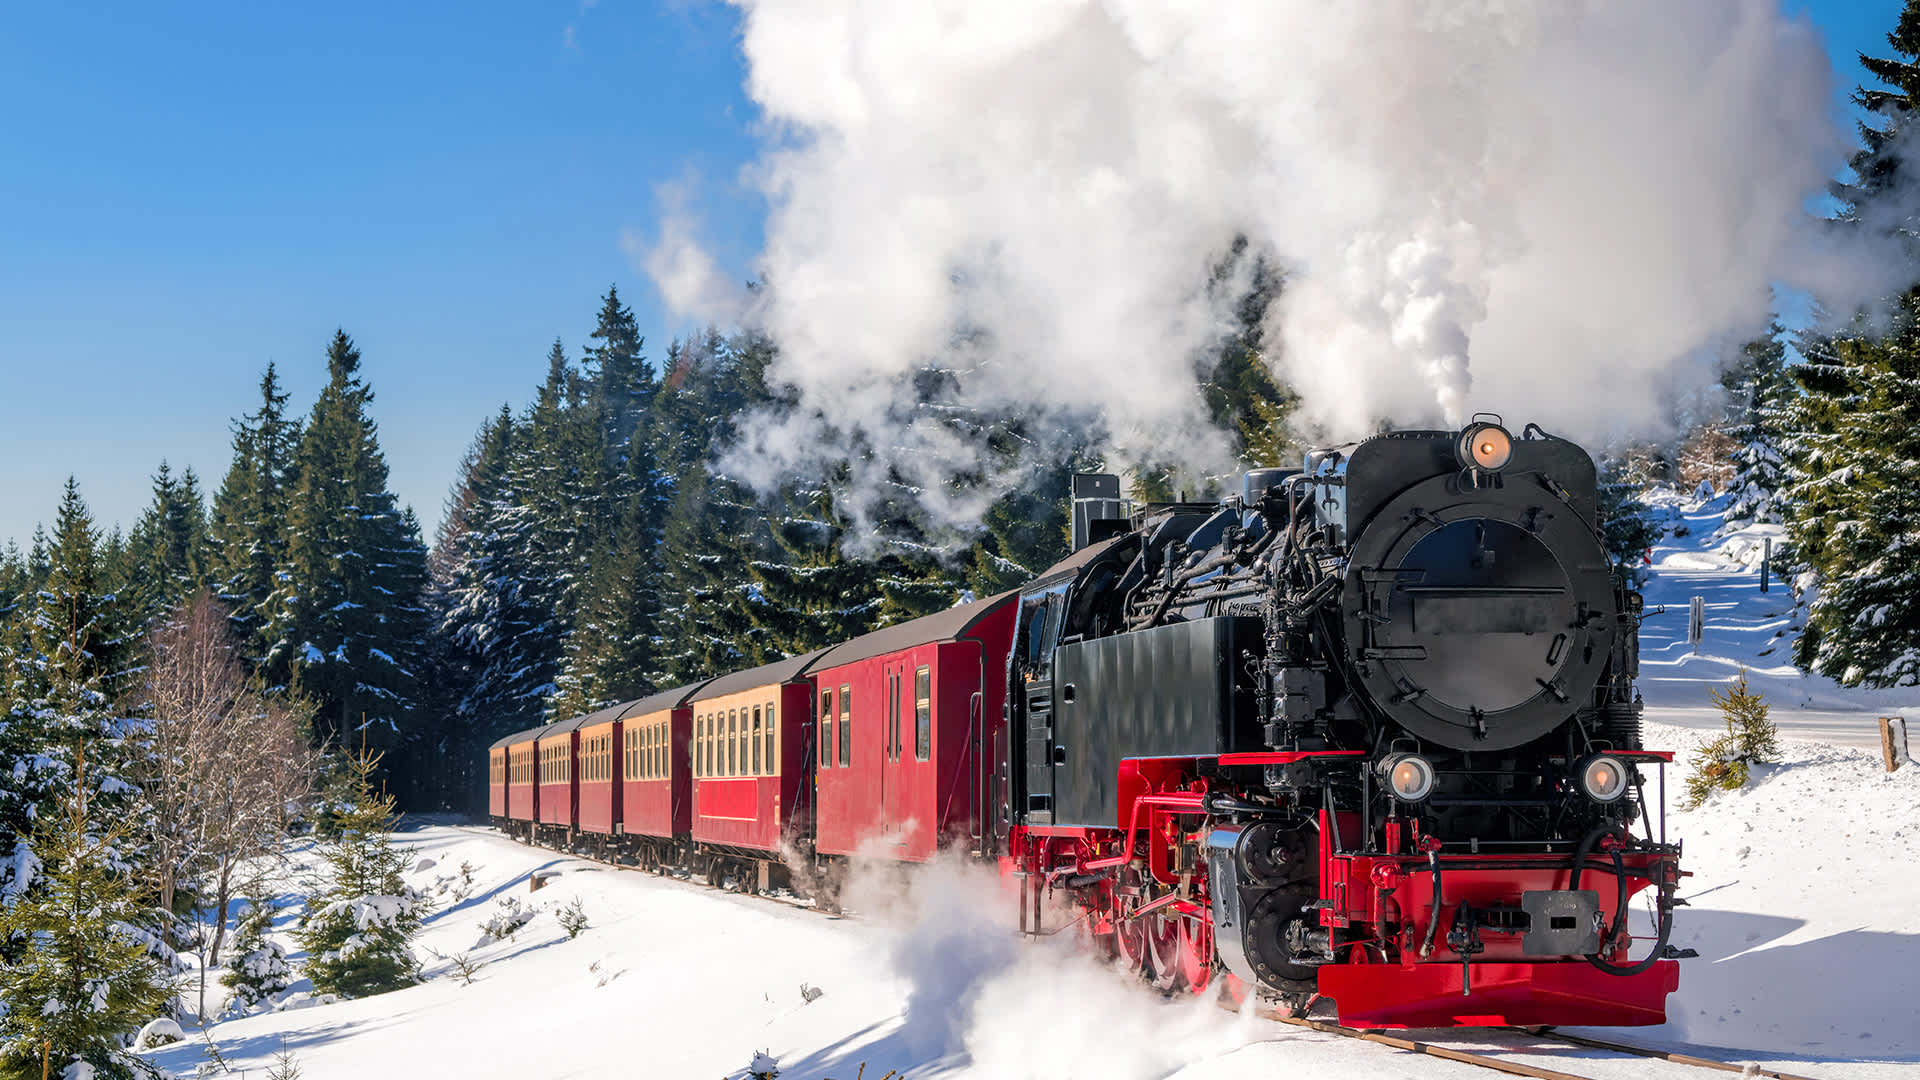 Photograph of a red and black steam train moving through a snow covered forest landscape.